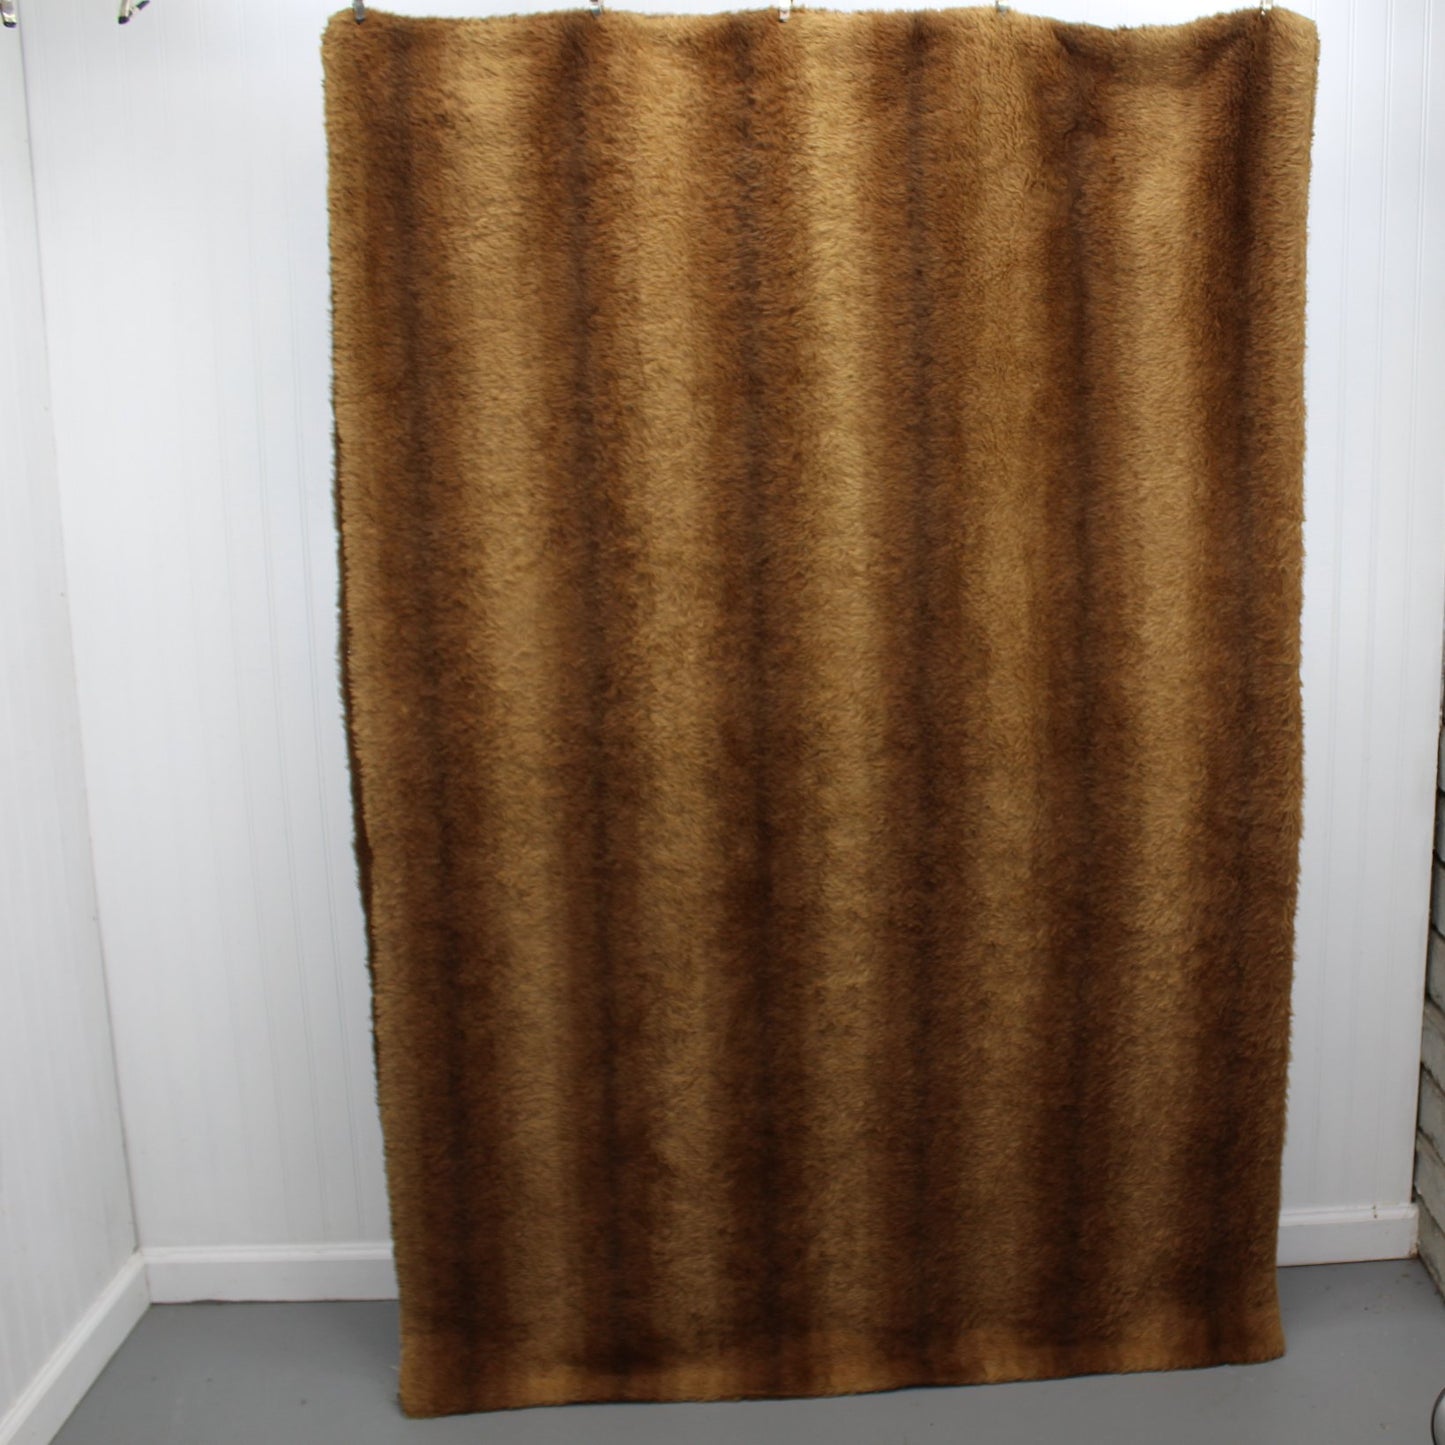 Antique Alpaca Wool Blanket Abercrombie Fitch Handsome Shades Brown full view of blanket